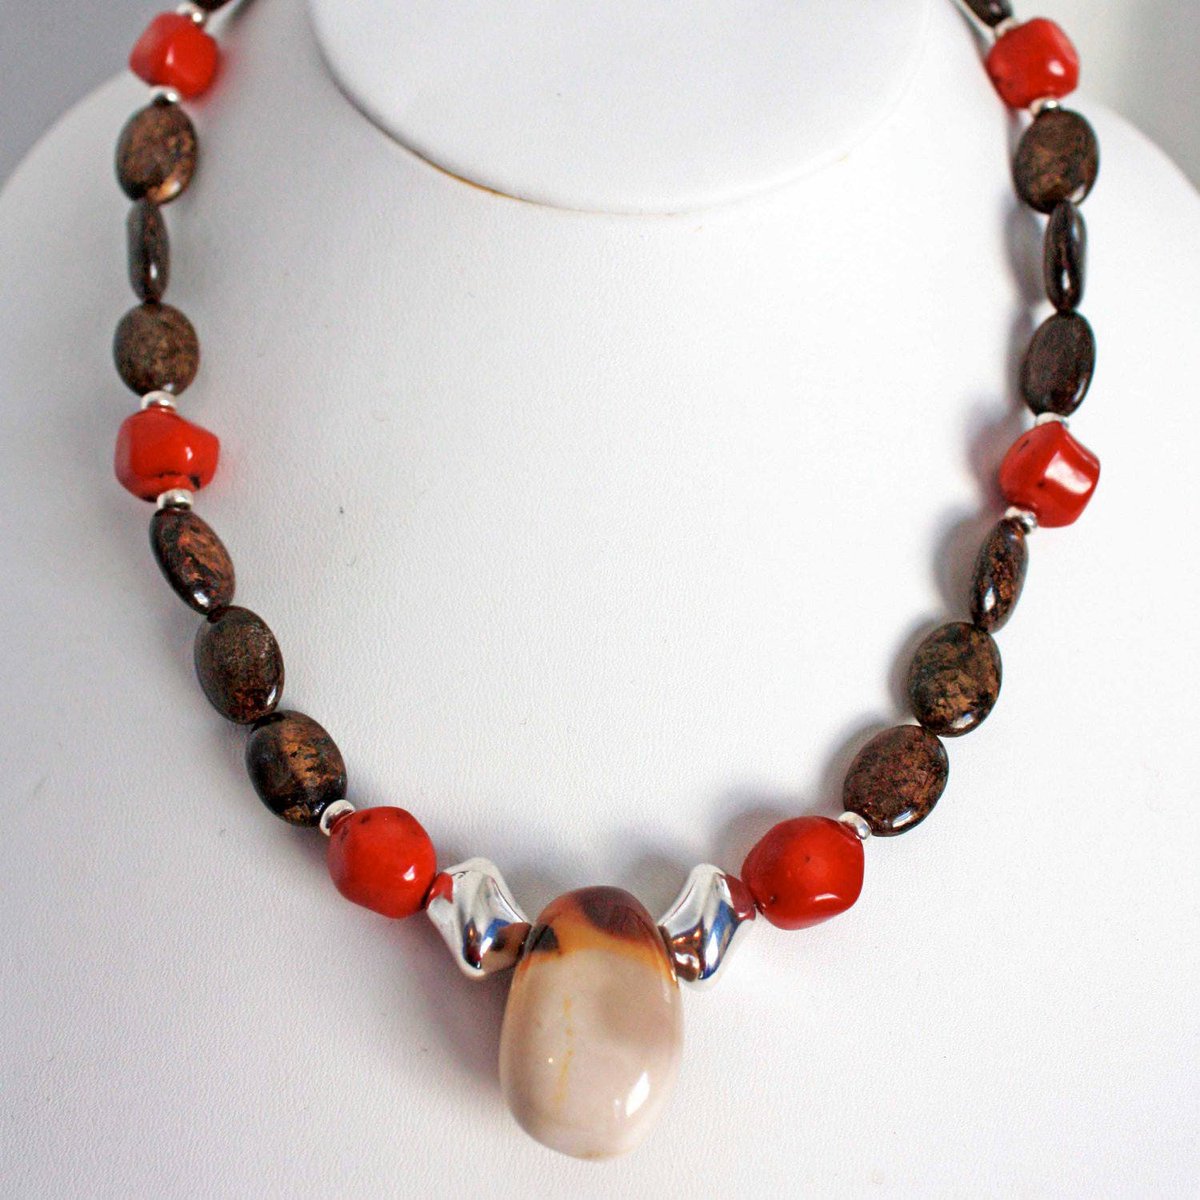 Brown and Red Beaded Necklace  Earthy Beaded Gemstone Necklace  Fall Fashion Necklace Gift for Woman tuppu.net/86d1d05 #CapitalCityCrafts #artisanjewelry #giftideas #handmadeinUSA #Etsy #HandmadeInUsa